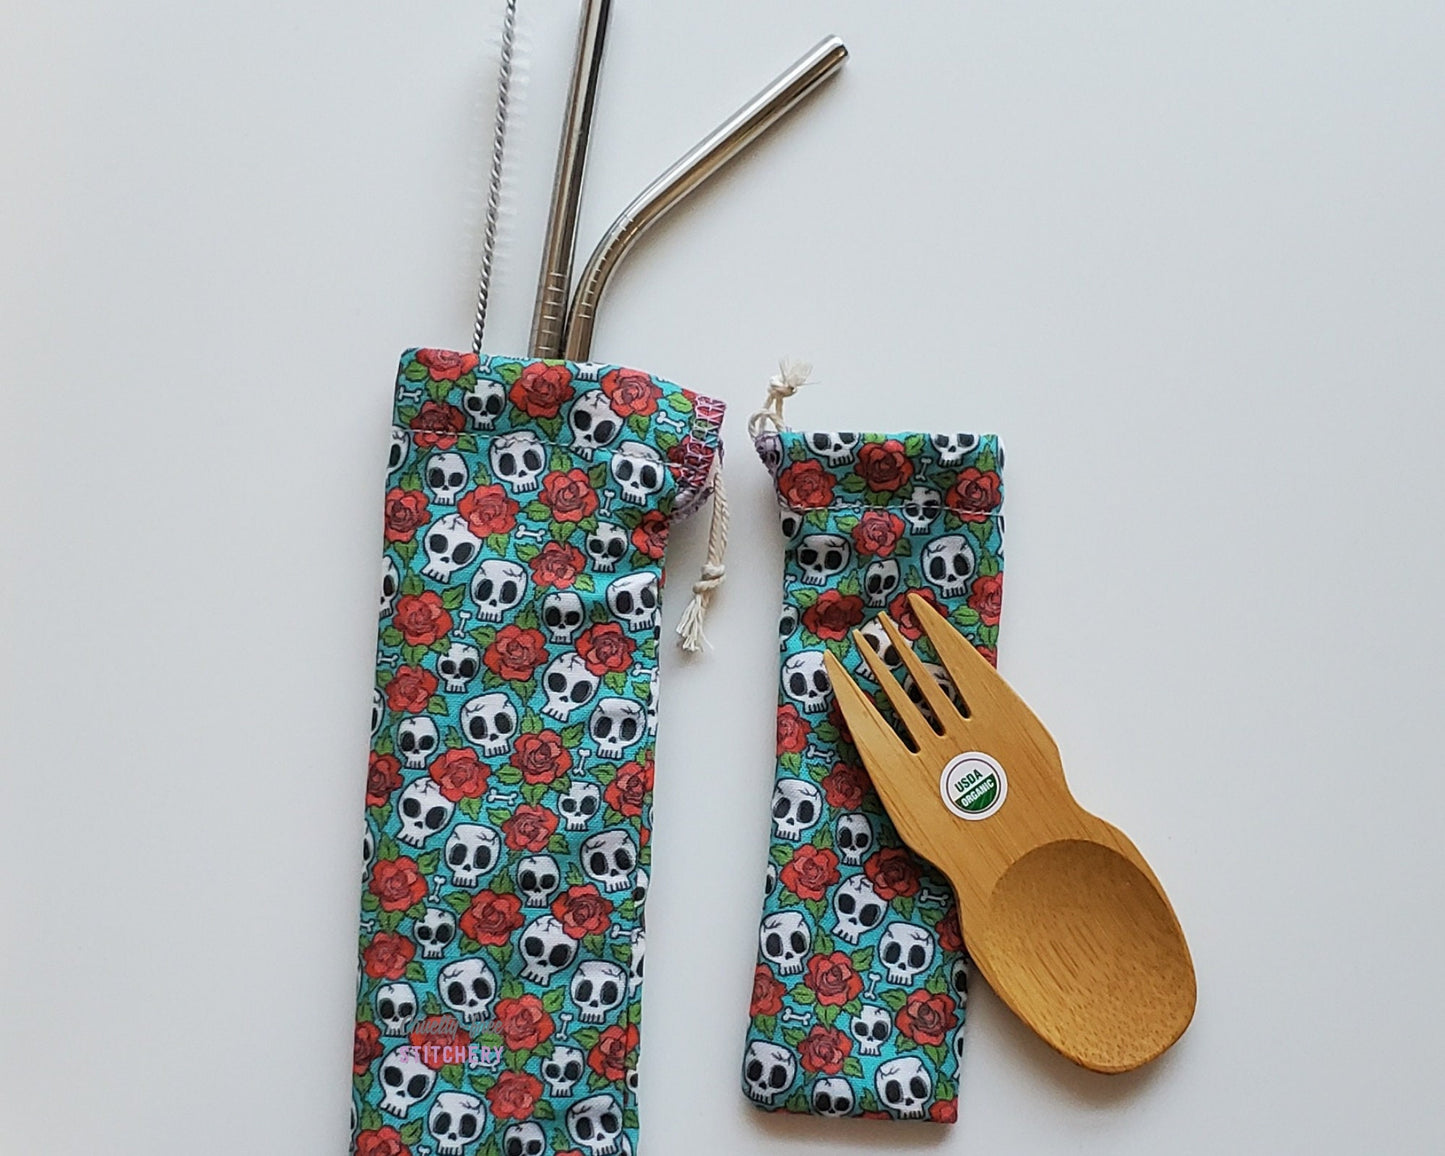 Reusable bamboo spork and stainless steel straw pouch set. The pouches are both teal blue with tiny cartoon skulls and red roses printed all over.